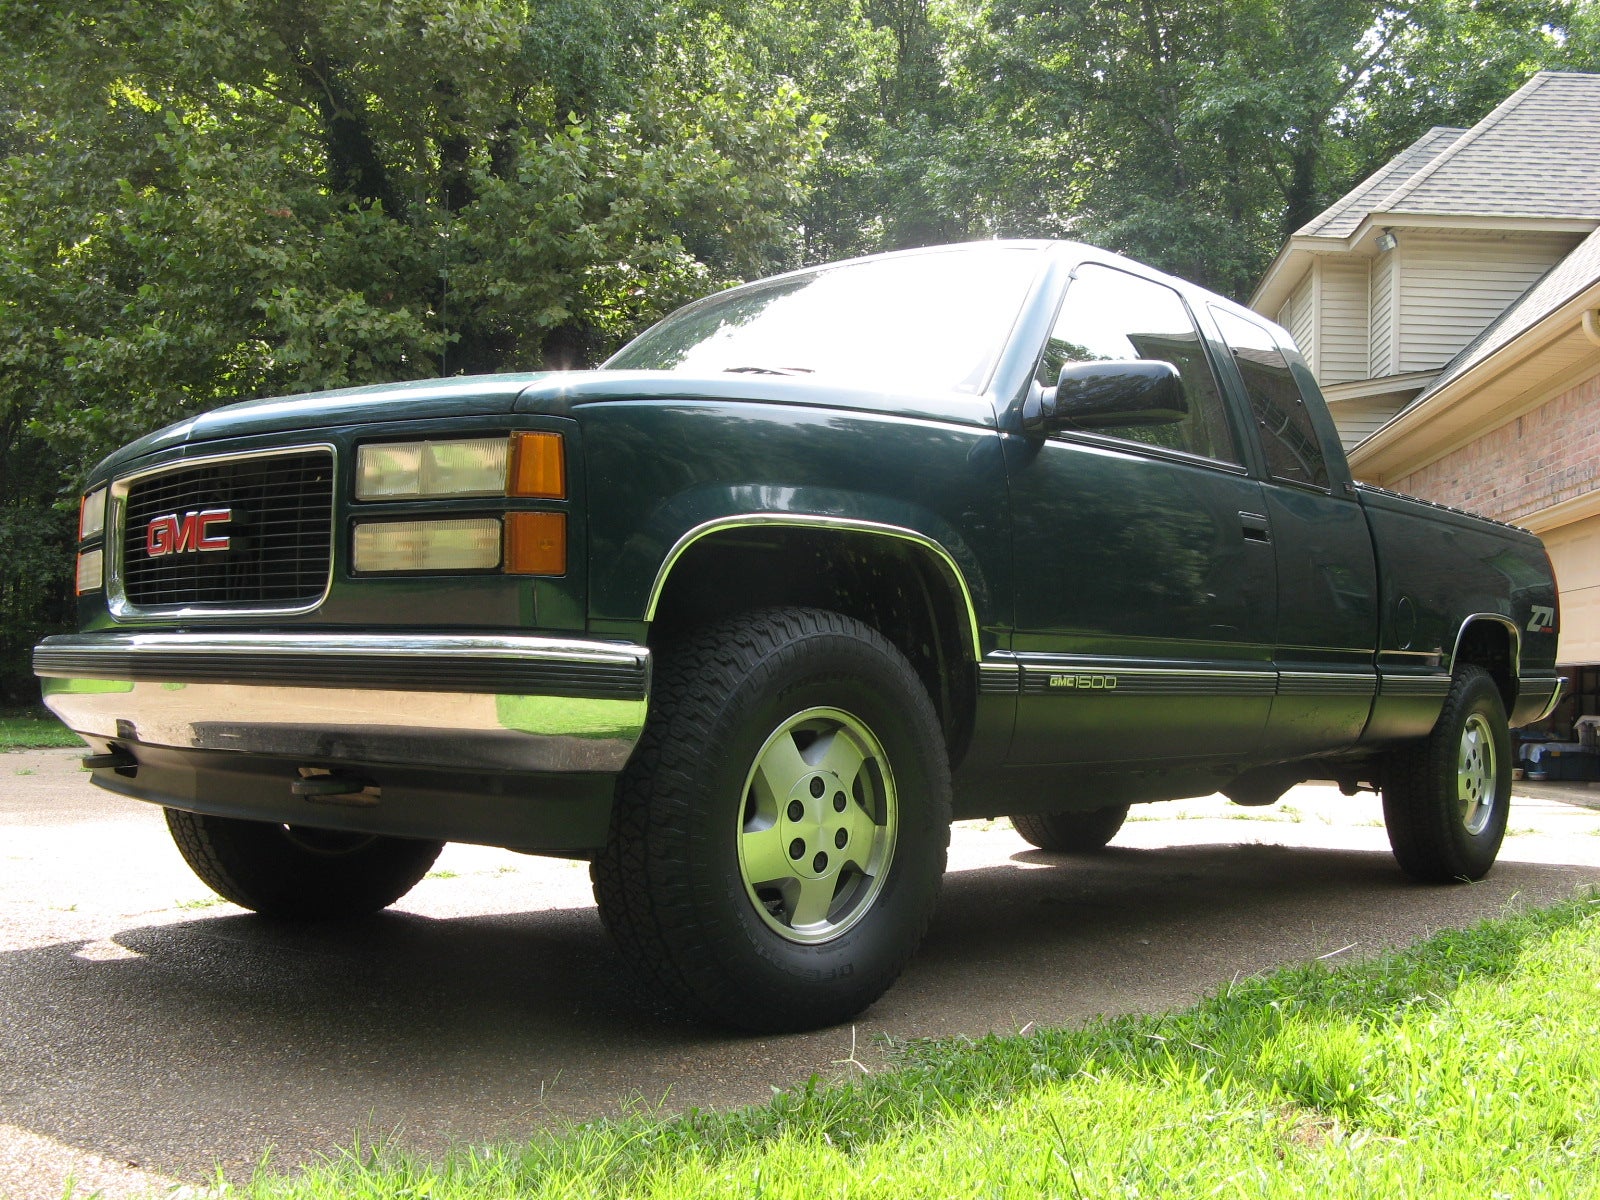 1995 Gmc 1500 extended cab #1